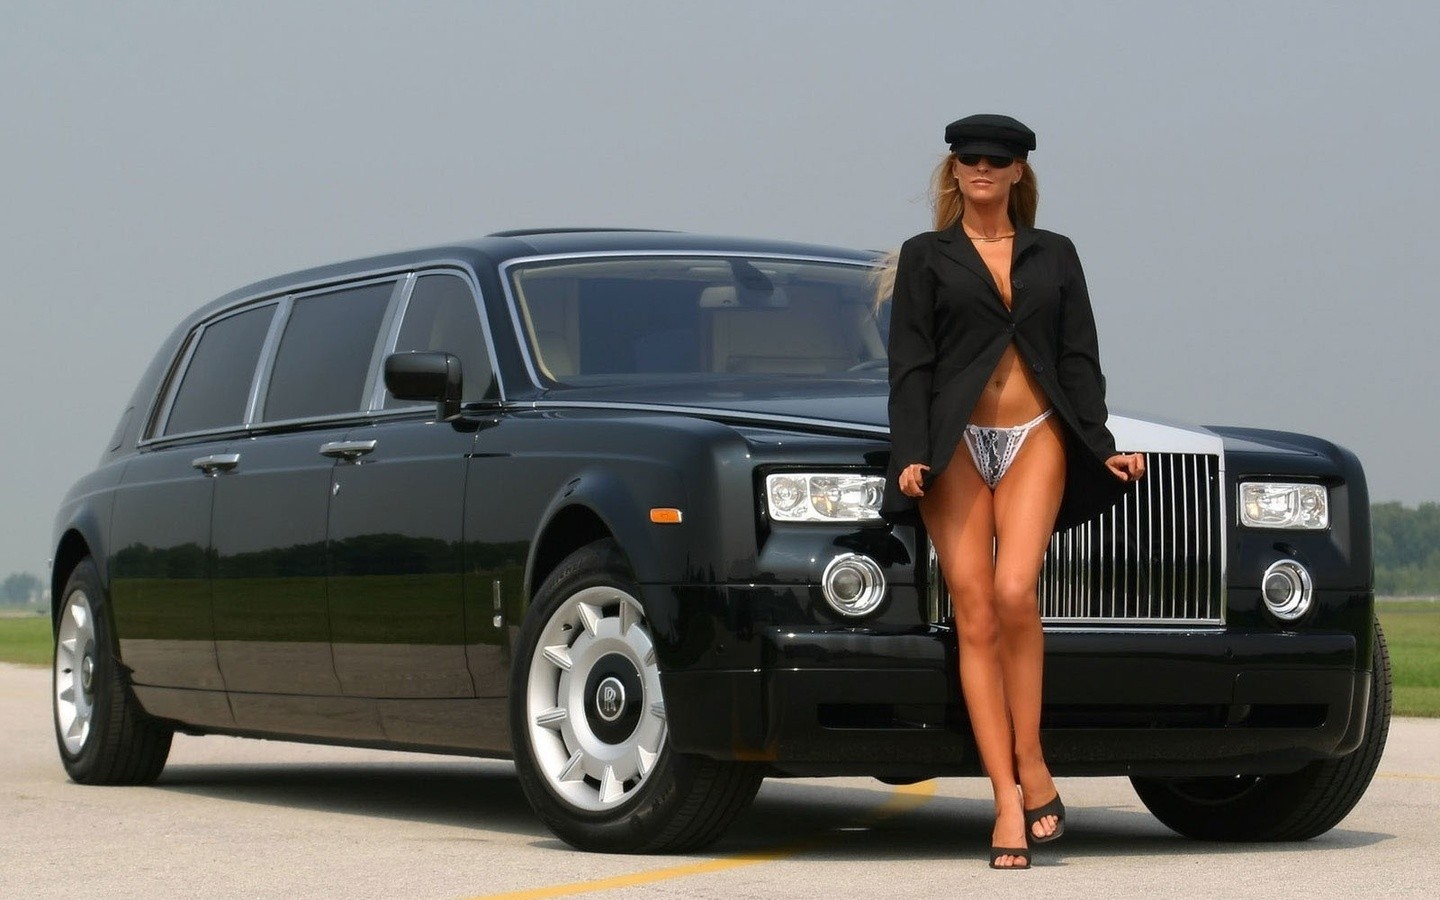 People 1440x900 women model brunette long hair lingerie white panties women outdoors women with cars car luxury cars Rolls-Royce Rolls-Royce Phantom saloon cars sunglasses jacket hat smiling legs cleavage partially clothed